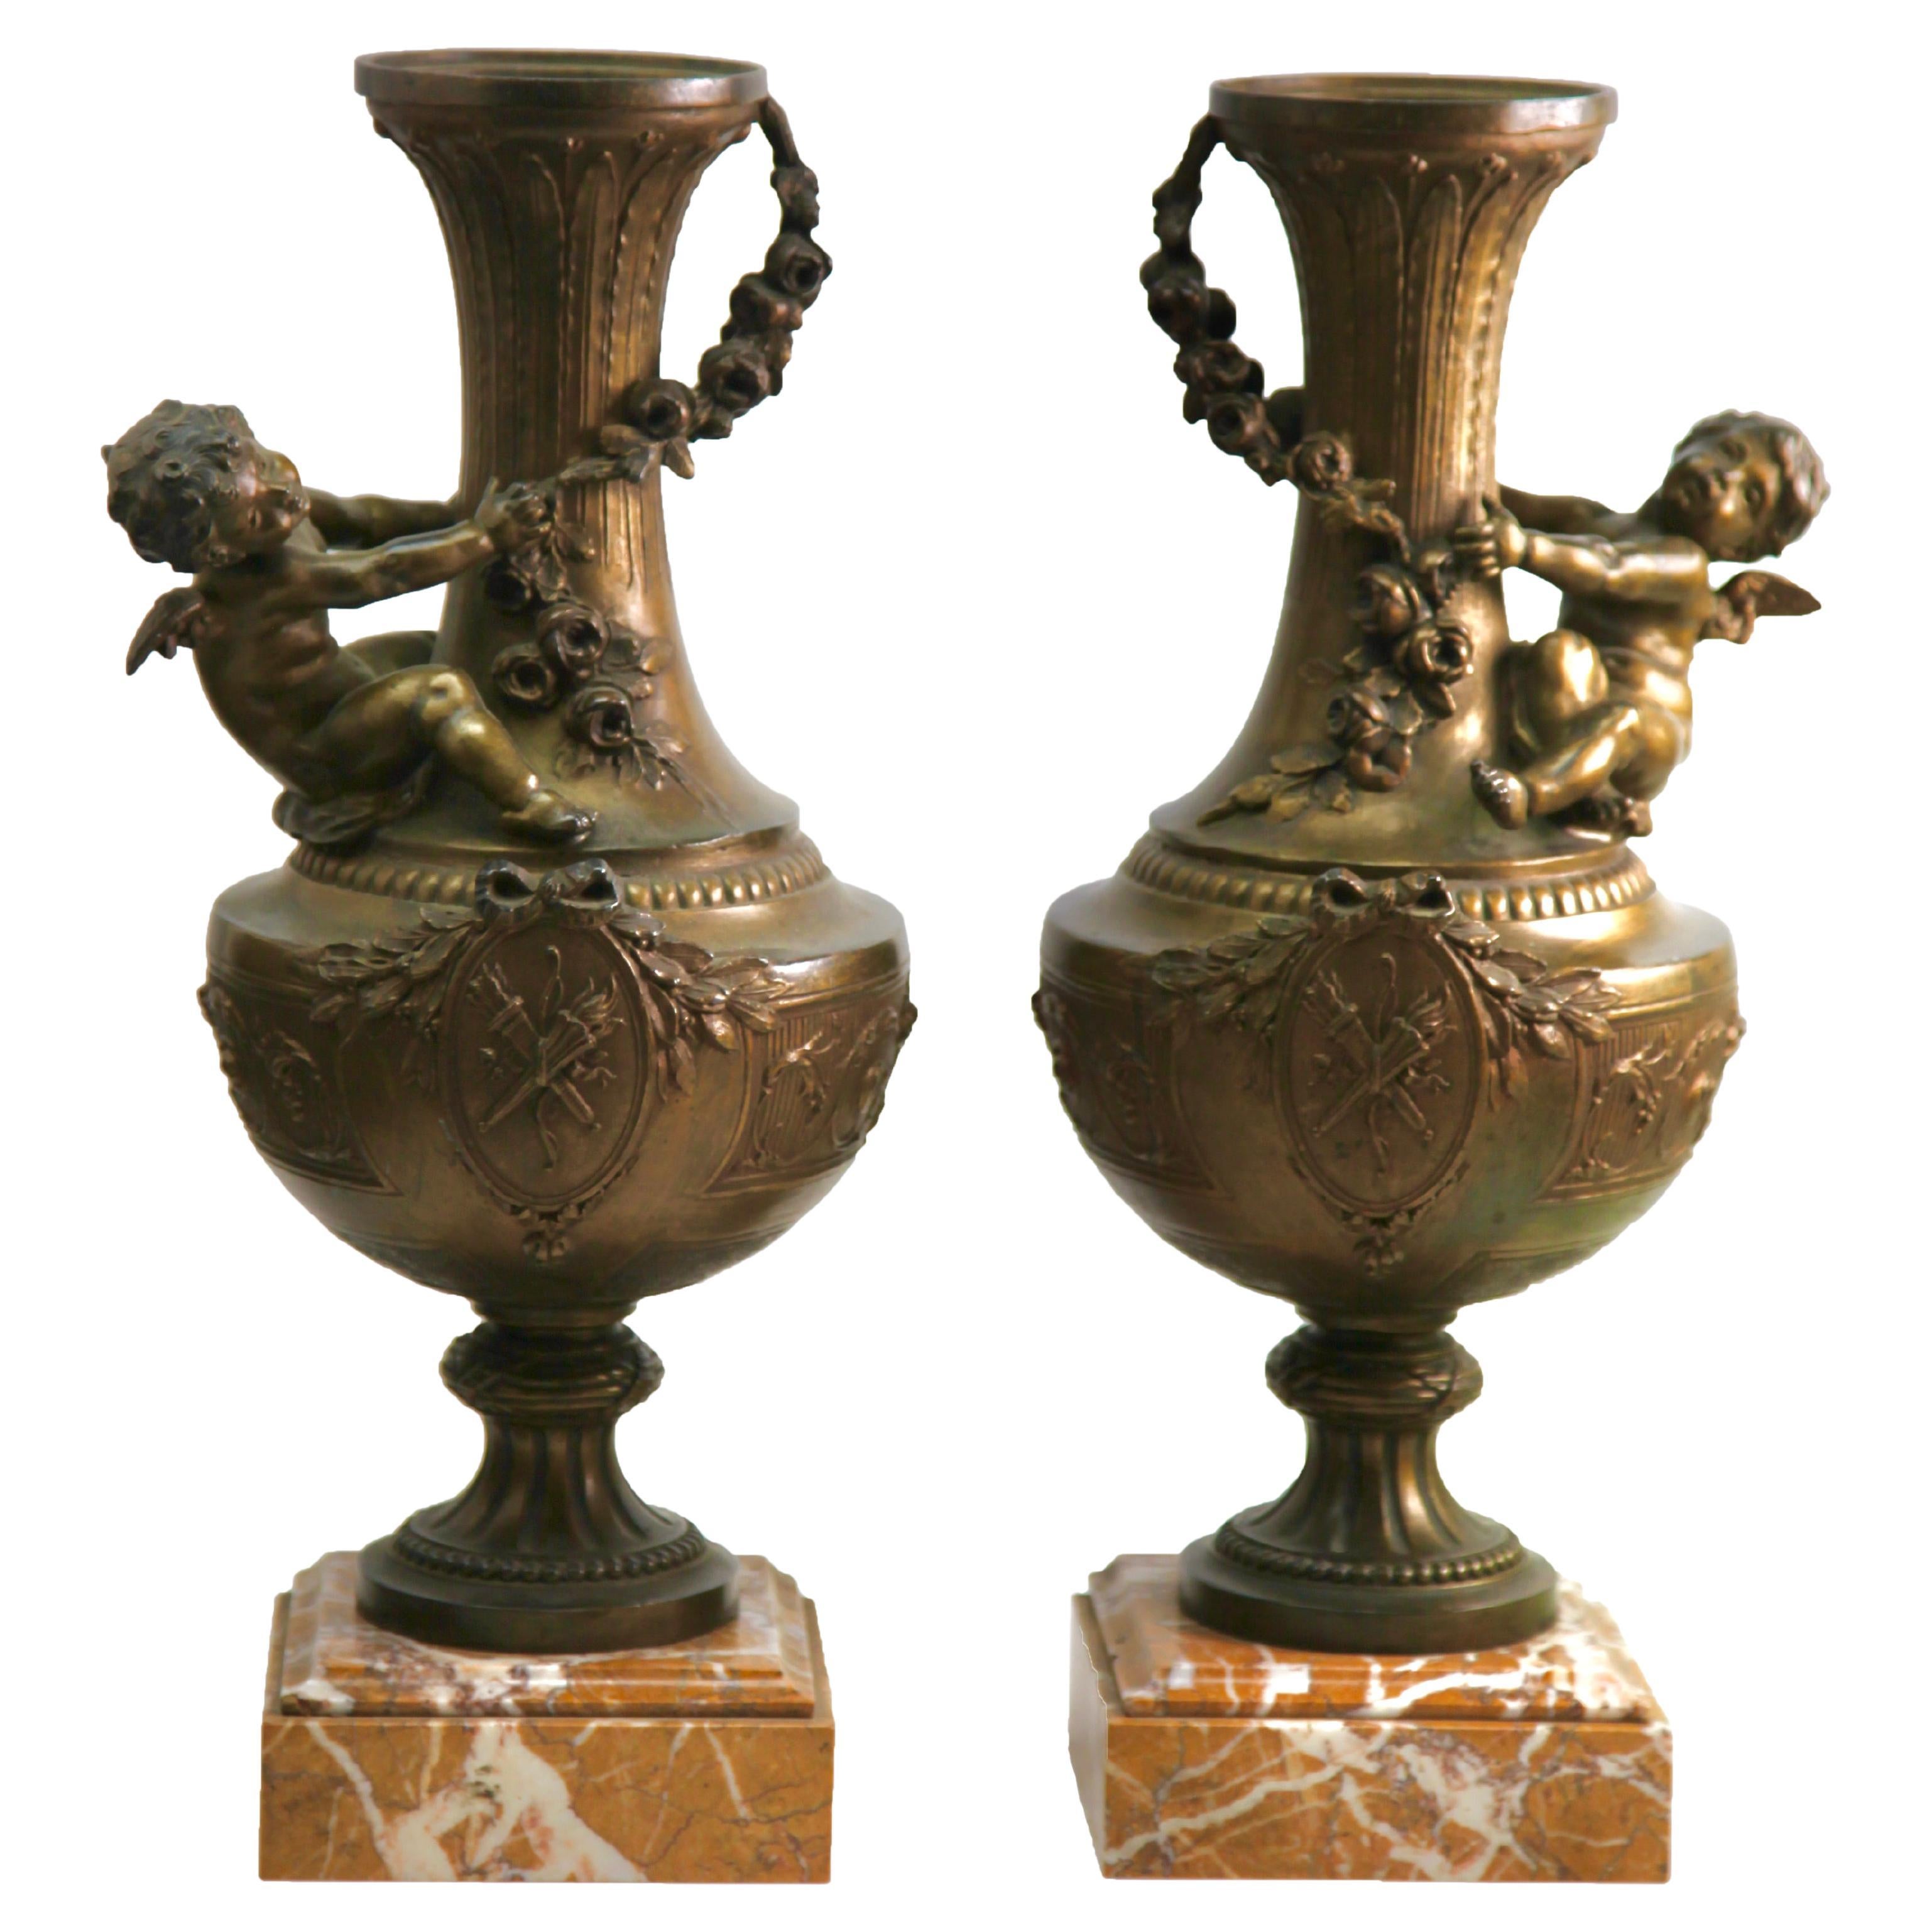 Pair of Ornamented Vases or Lamps with Little Angels and Richly Decorated